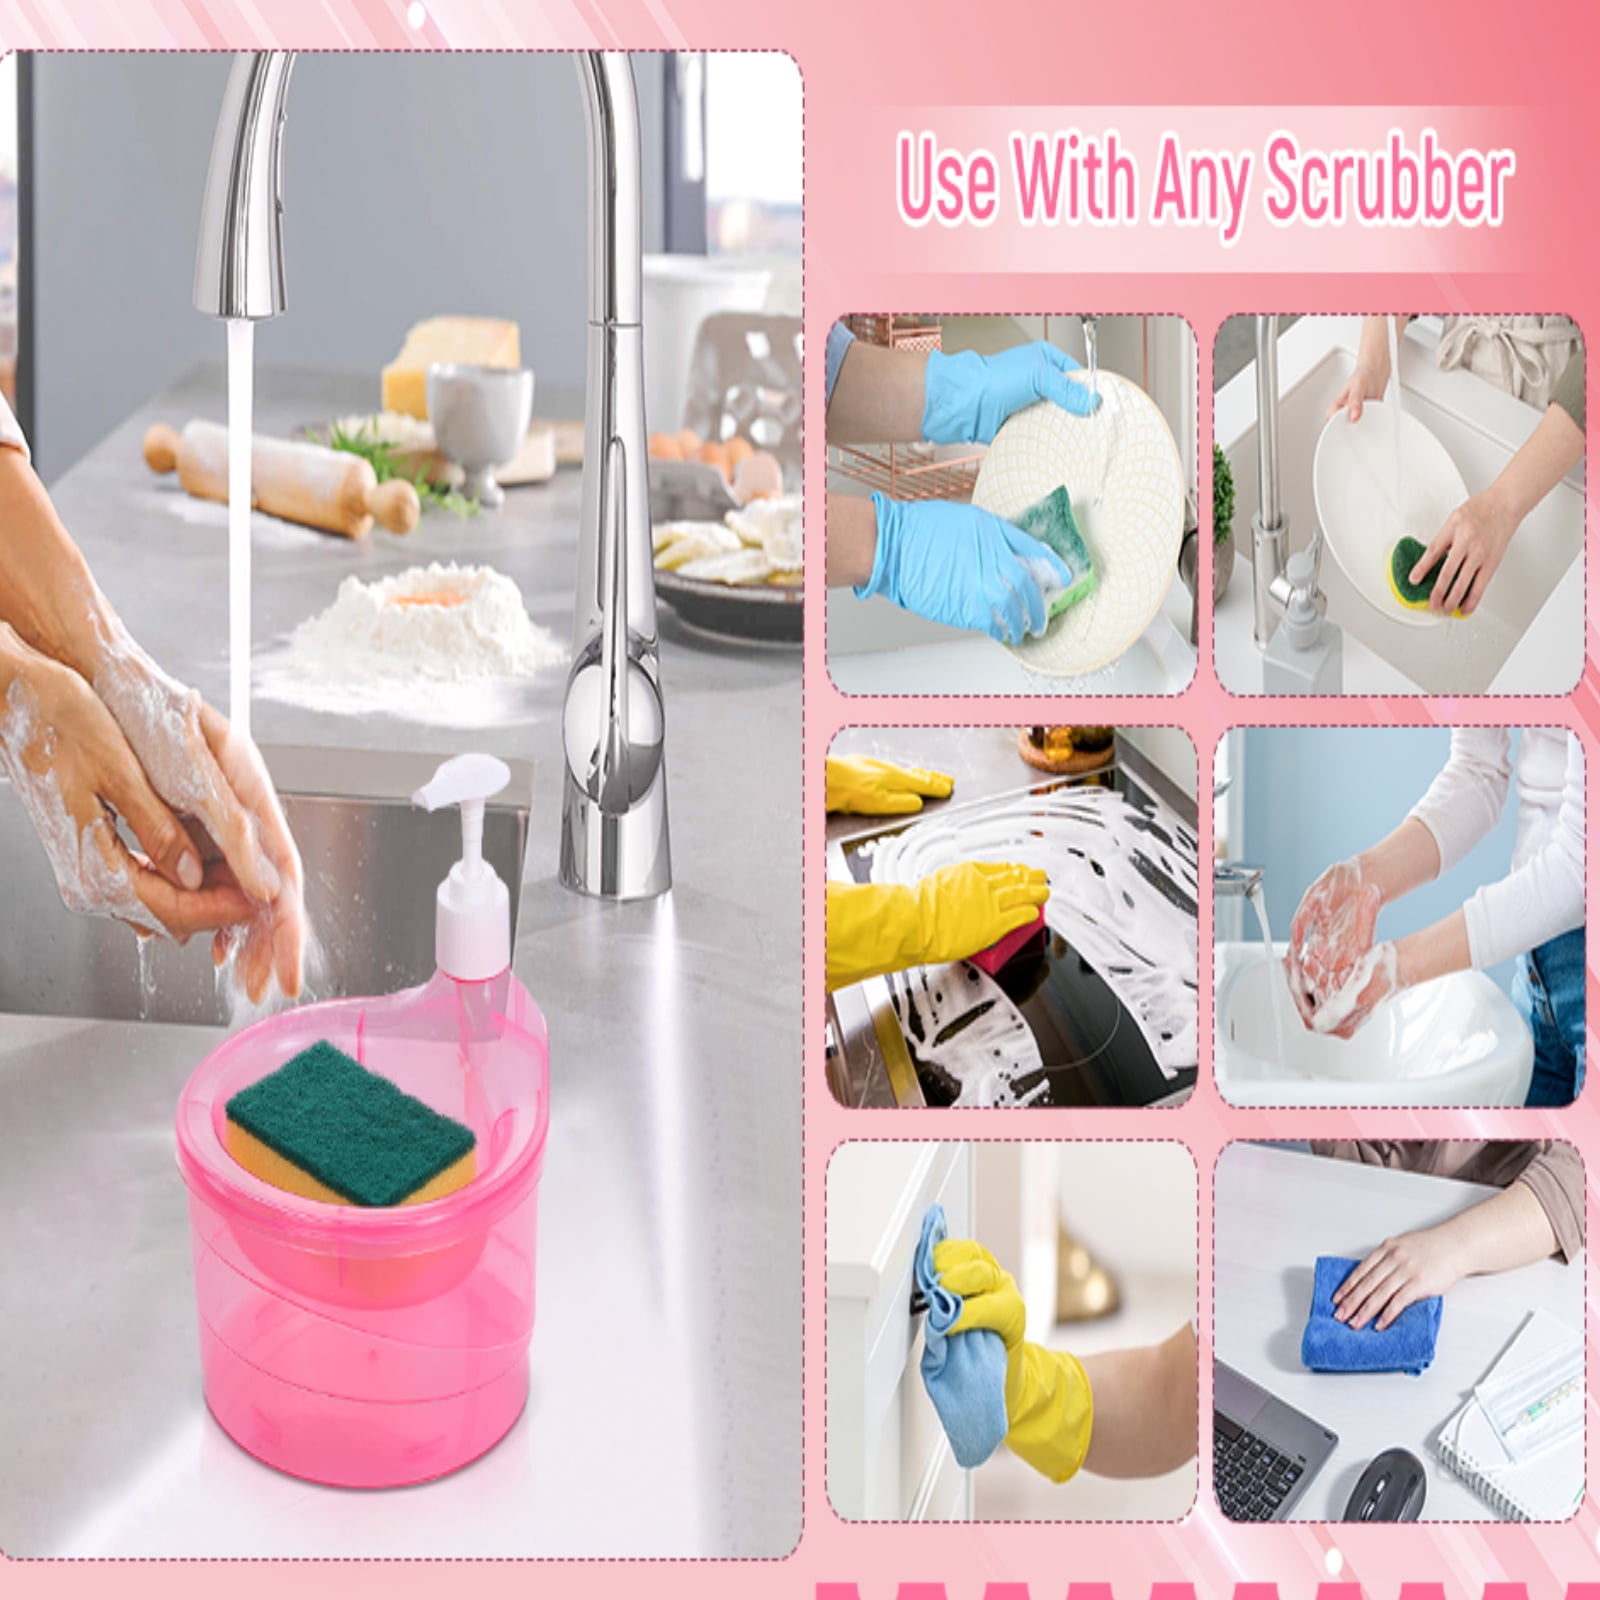 2-in-1 Dish Soap Dispenser with Sponge Holder Tray – Domestic